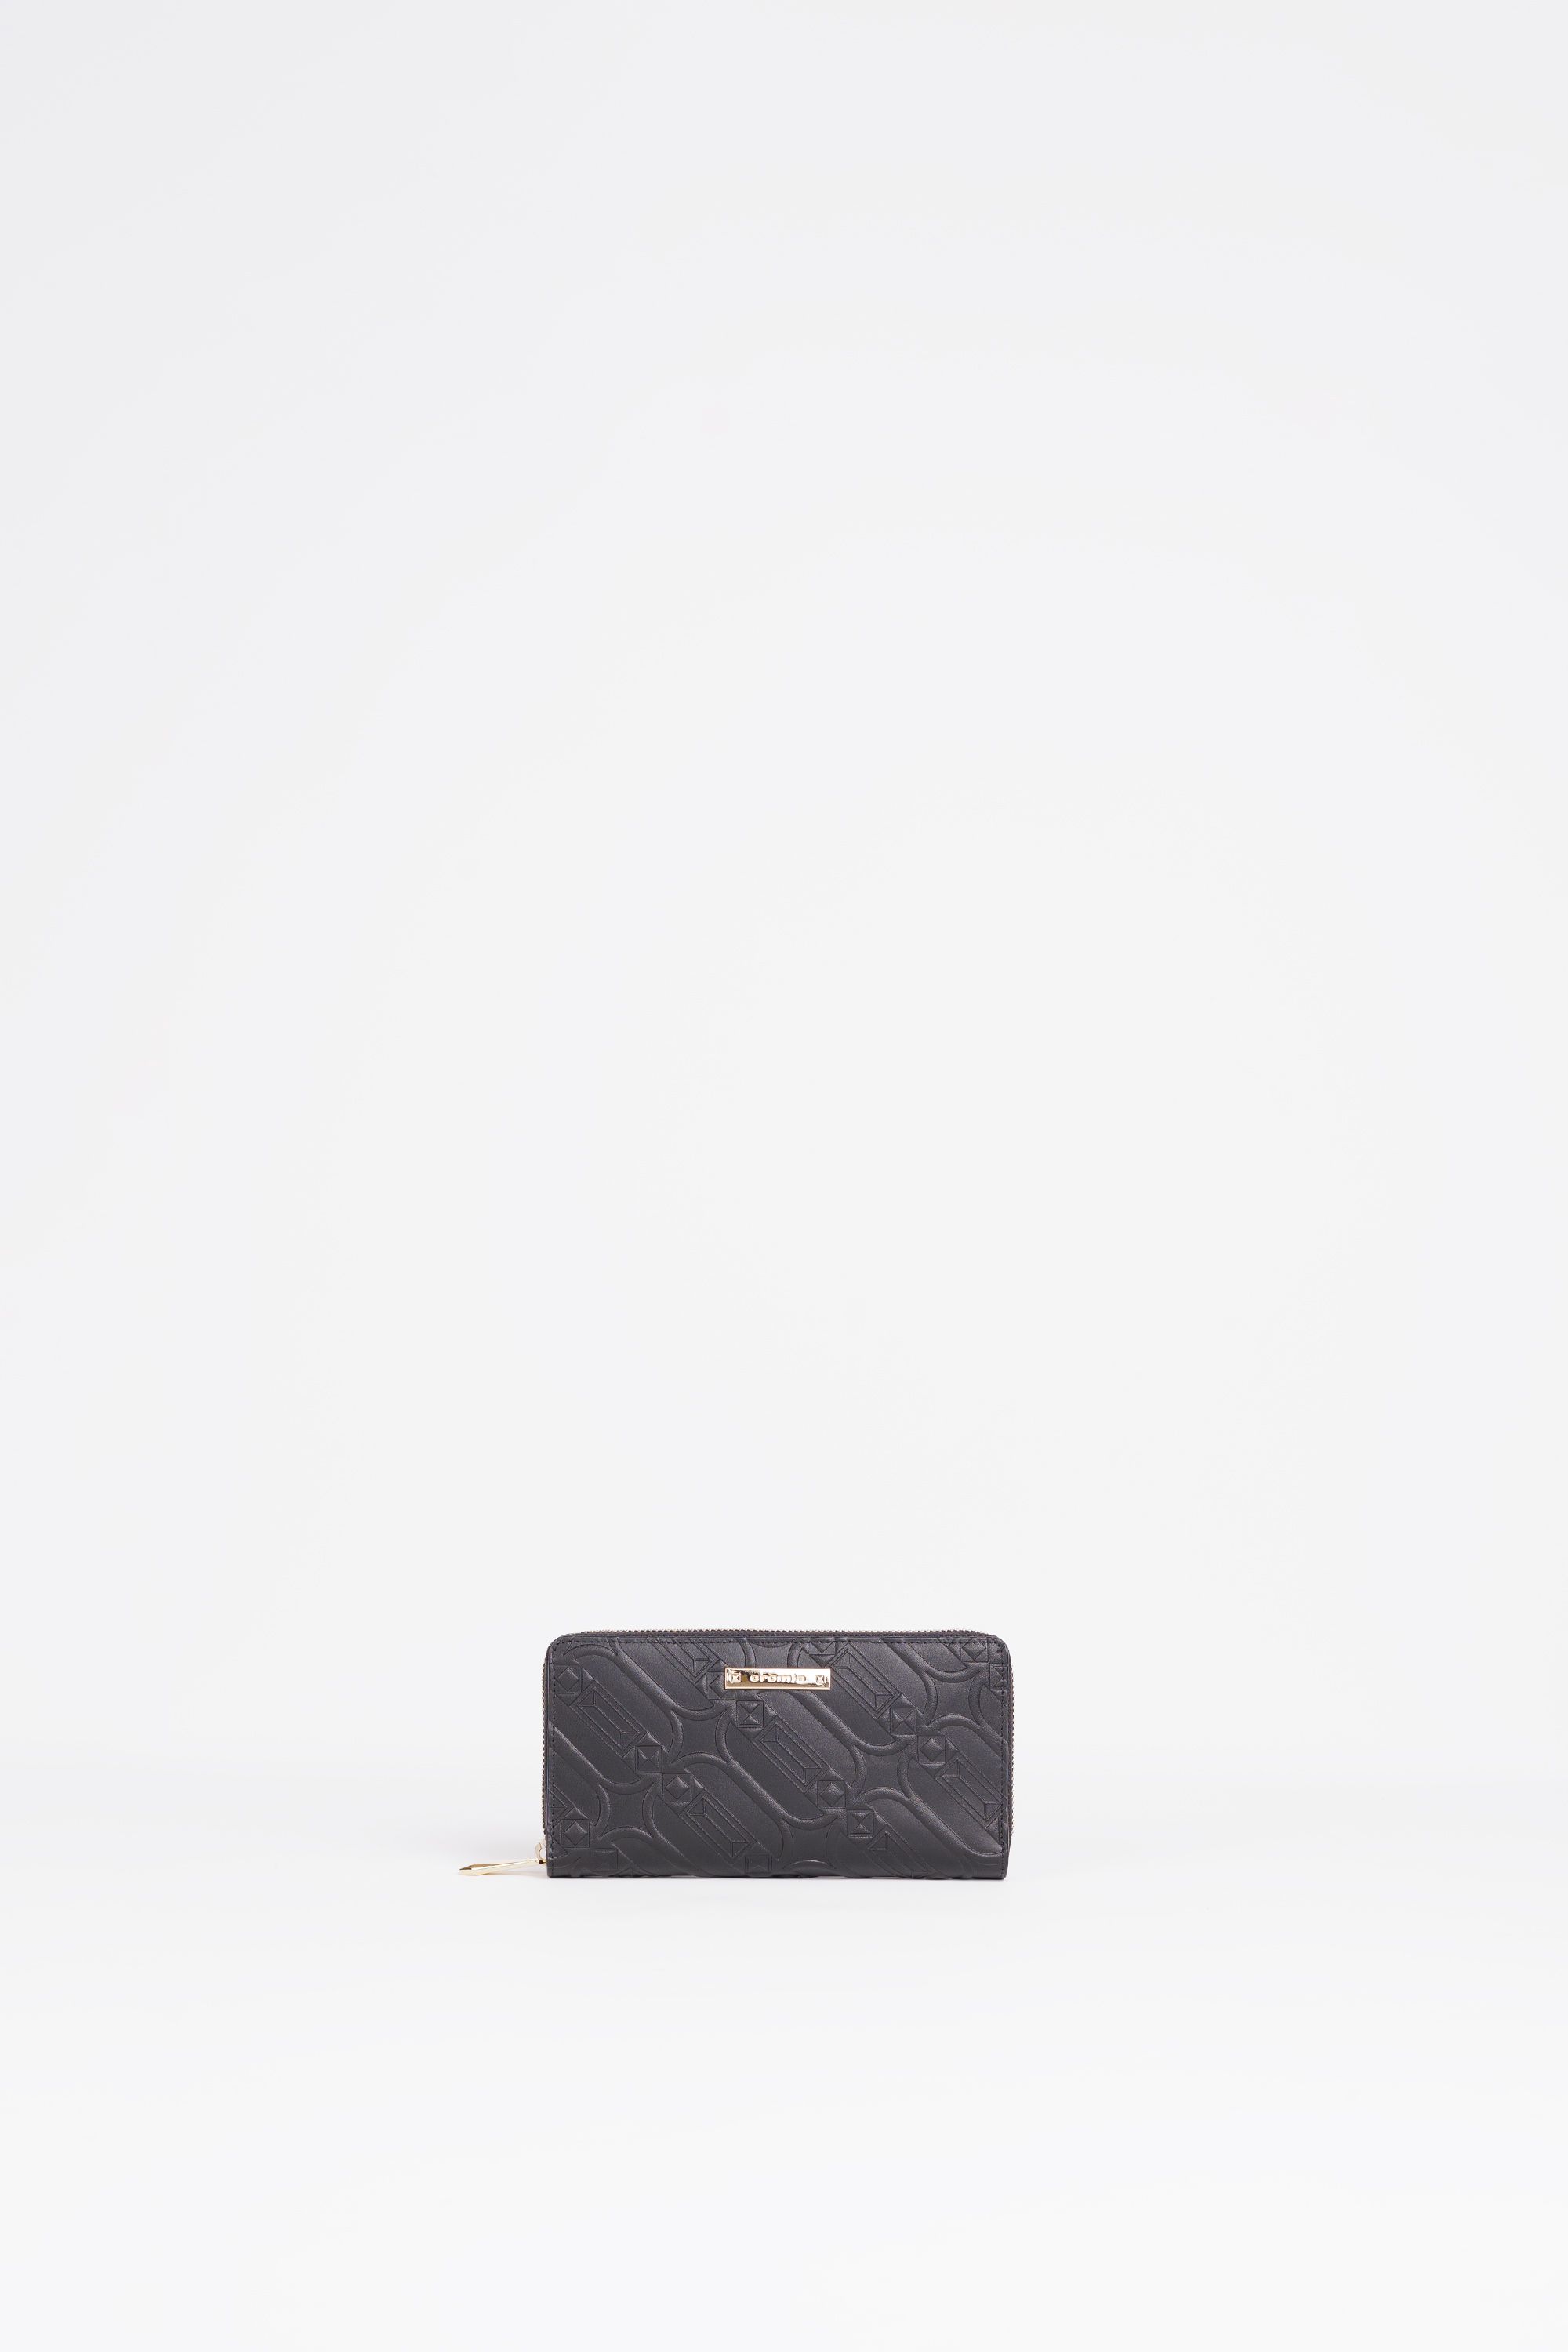 Cromia - 8051978387534 wallets glam